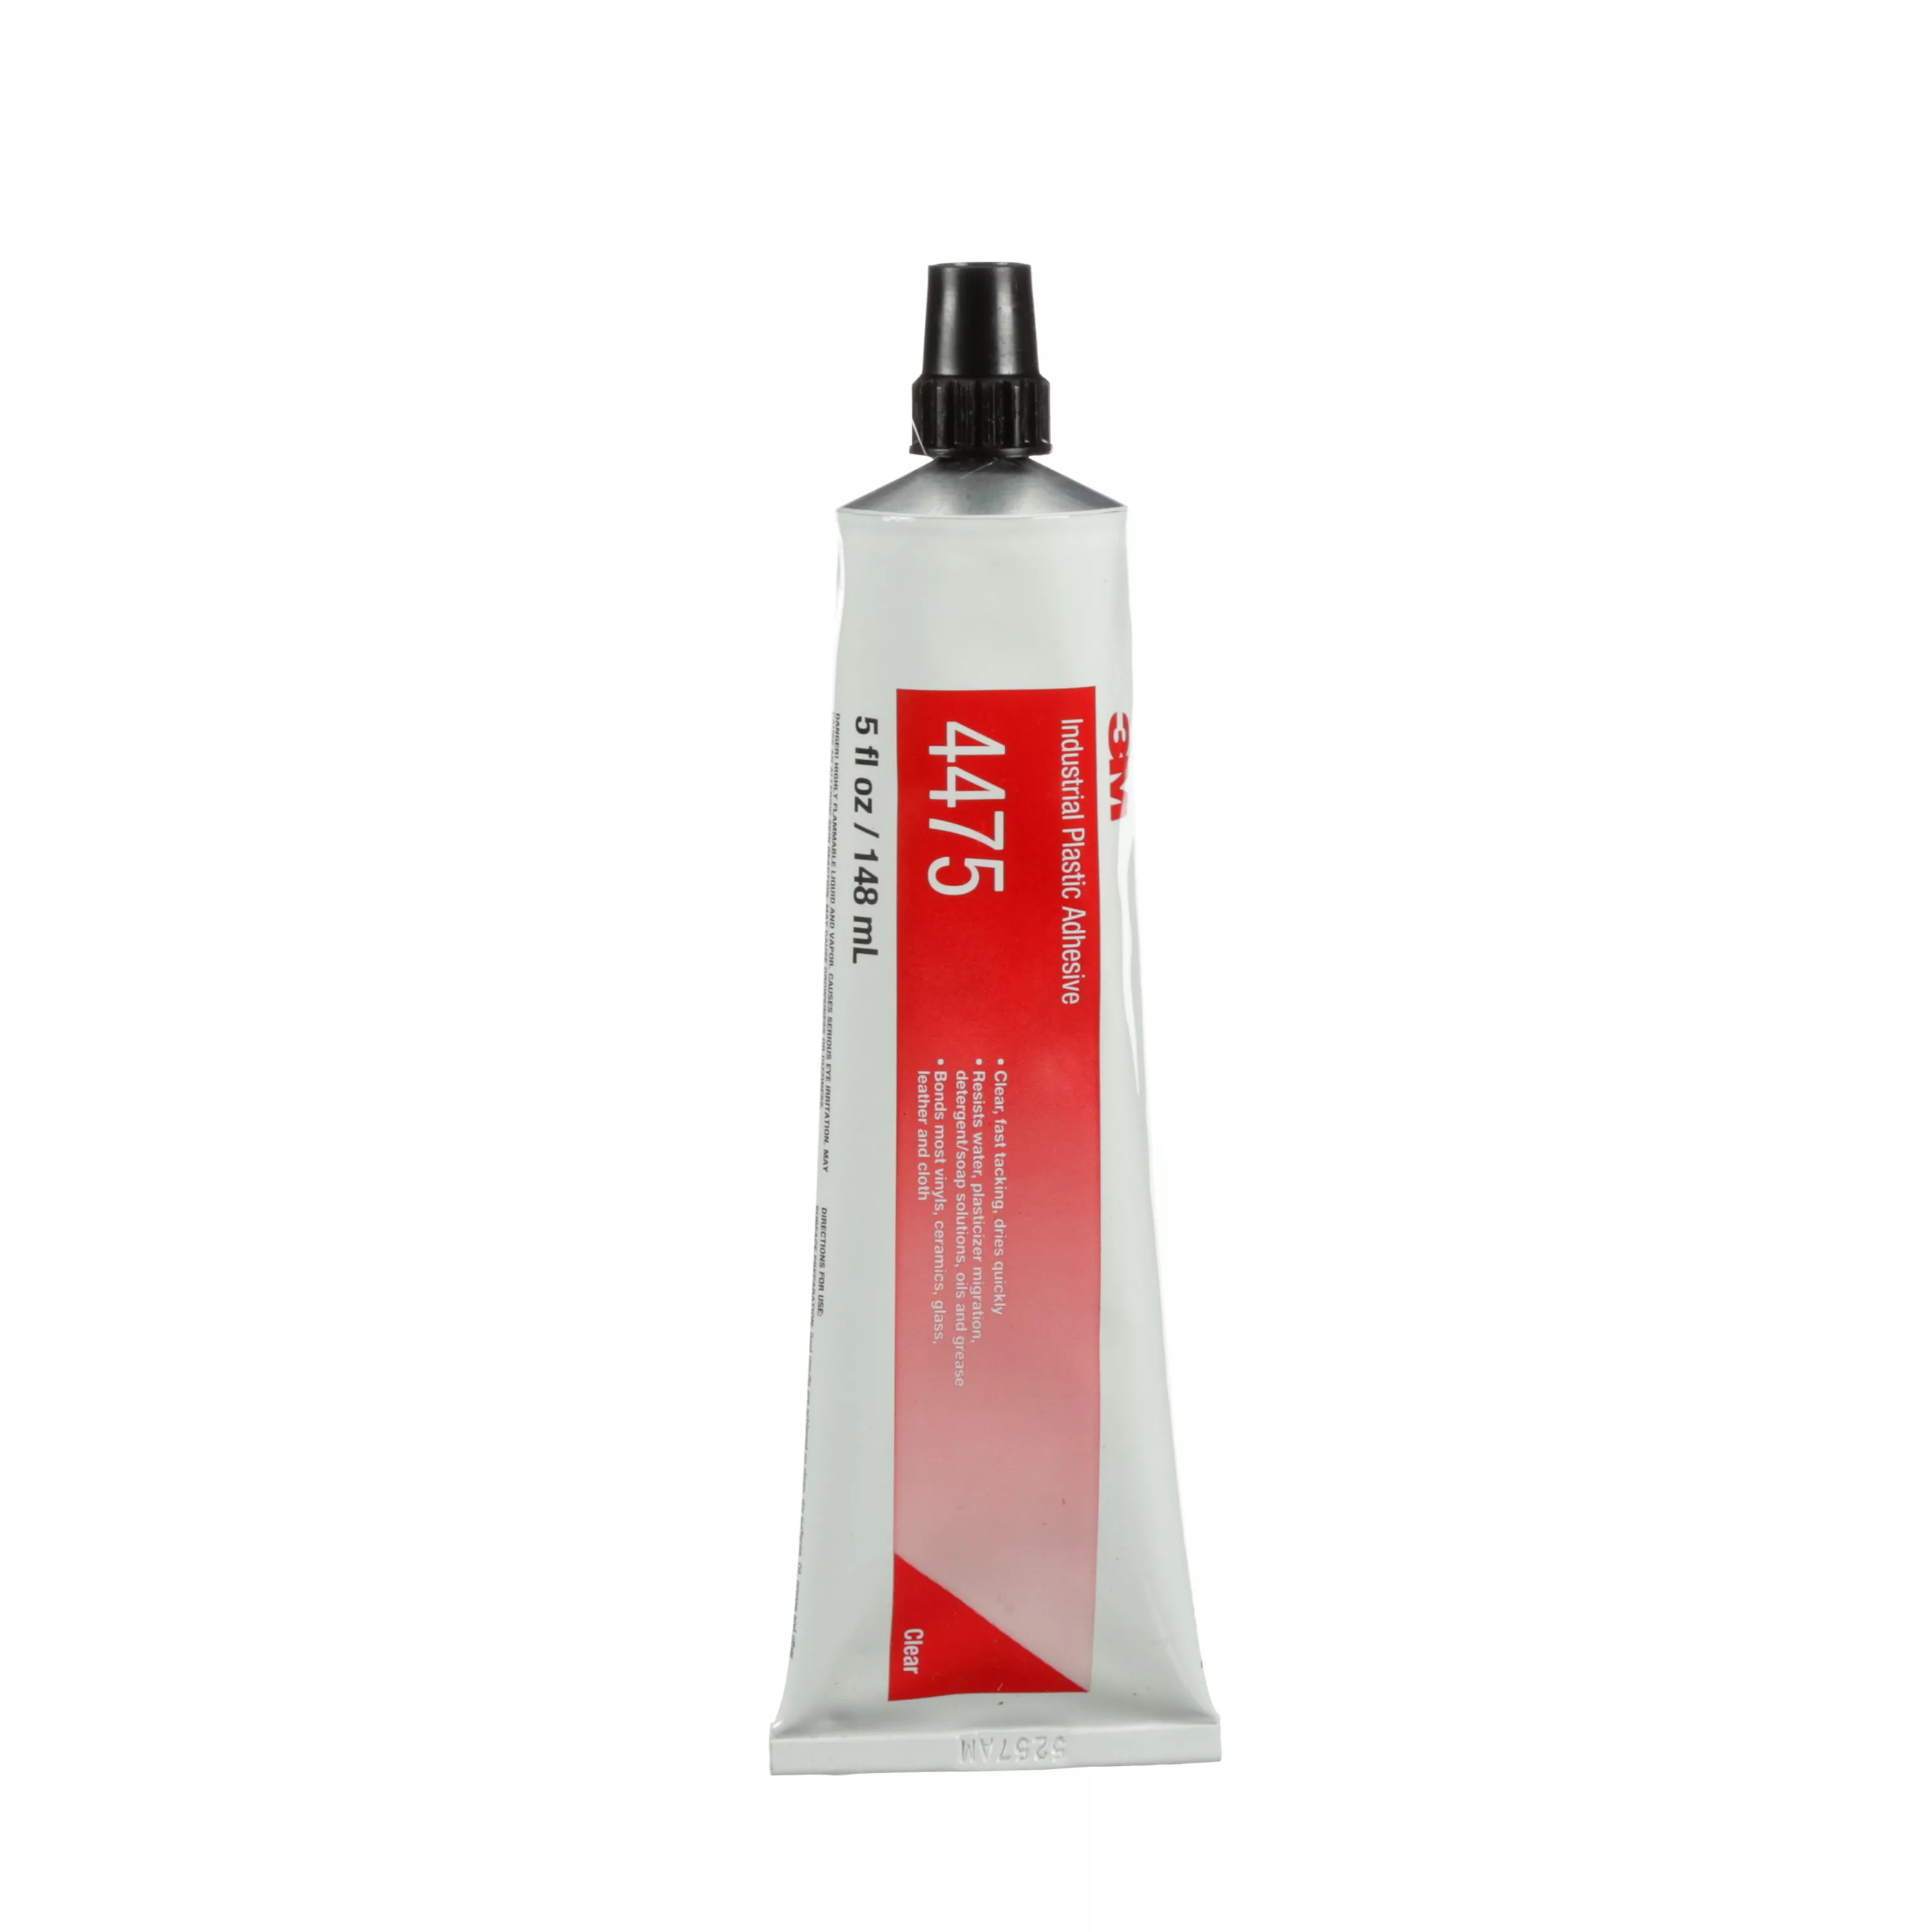 3M™ Industrial Plastic Adhesive 4475, Clear, 5 Oz Tube, 36/Case